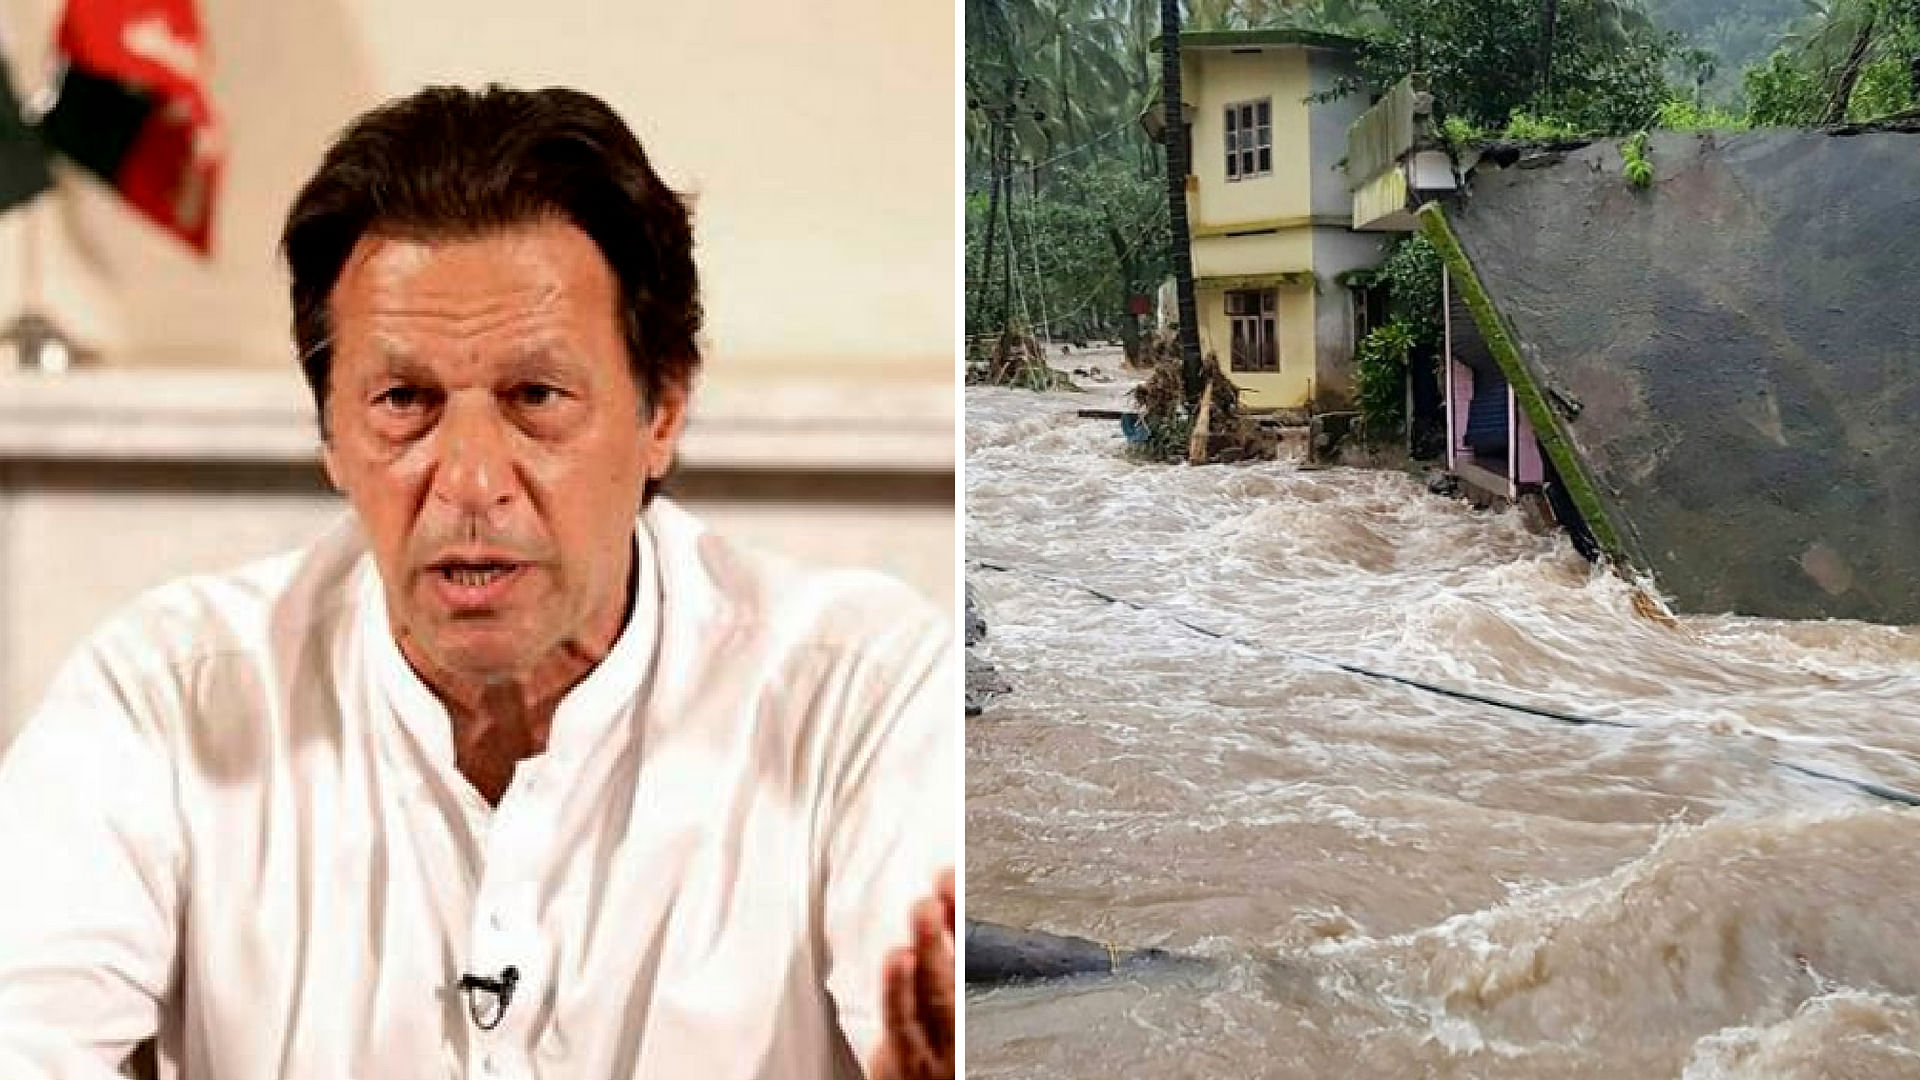 Pakistan’s new Prime Minister Imran Khan on Thursday, 23 August said Pakistan stands ready to provide any humanitarian assistance to flood-ravaged Kerala.